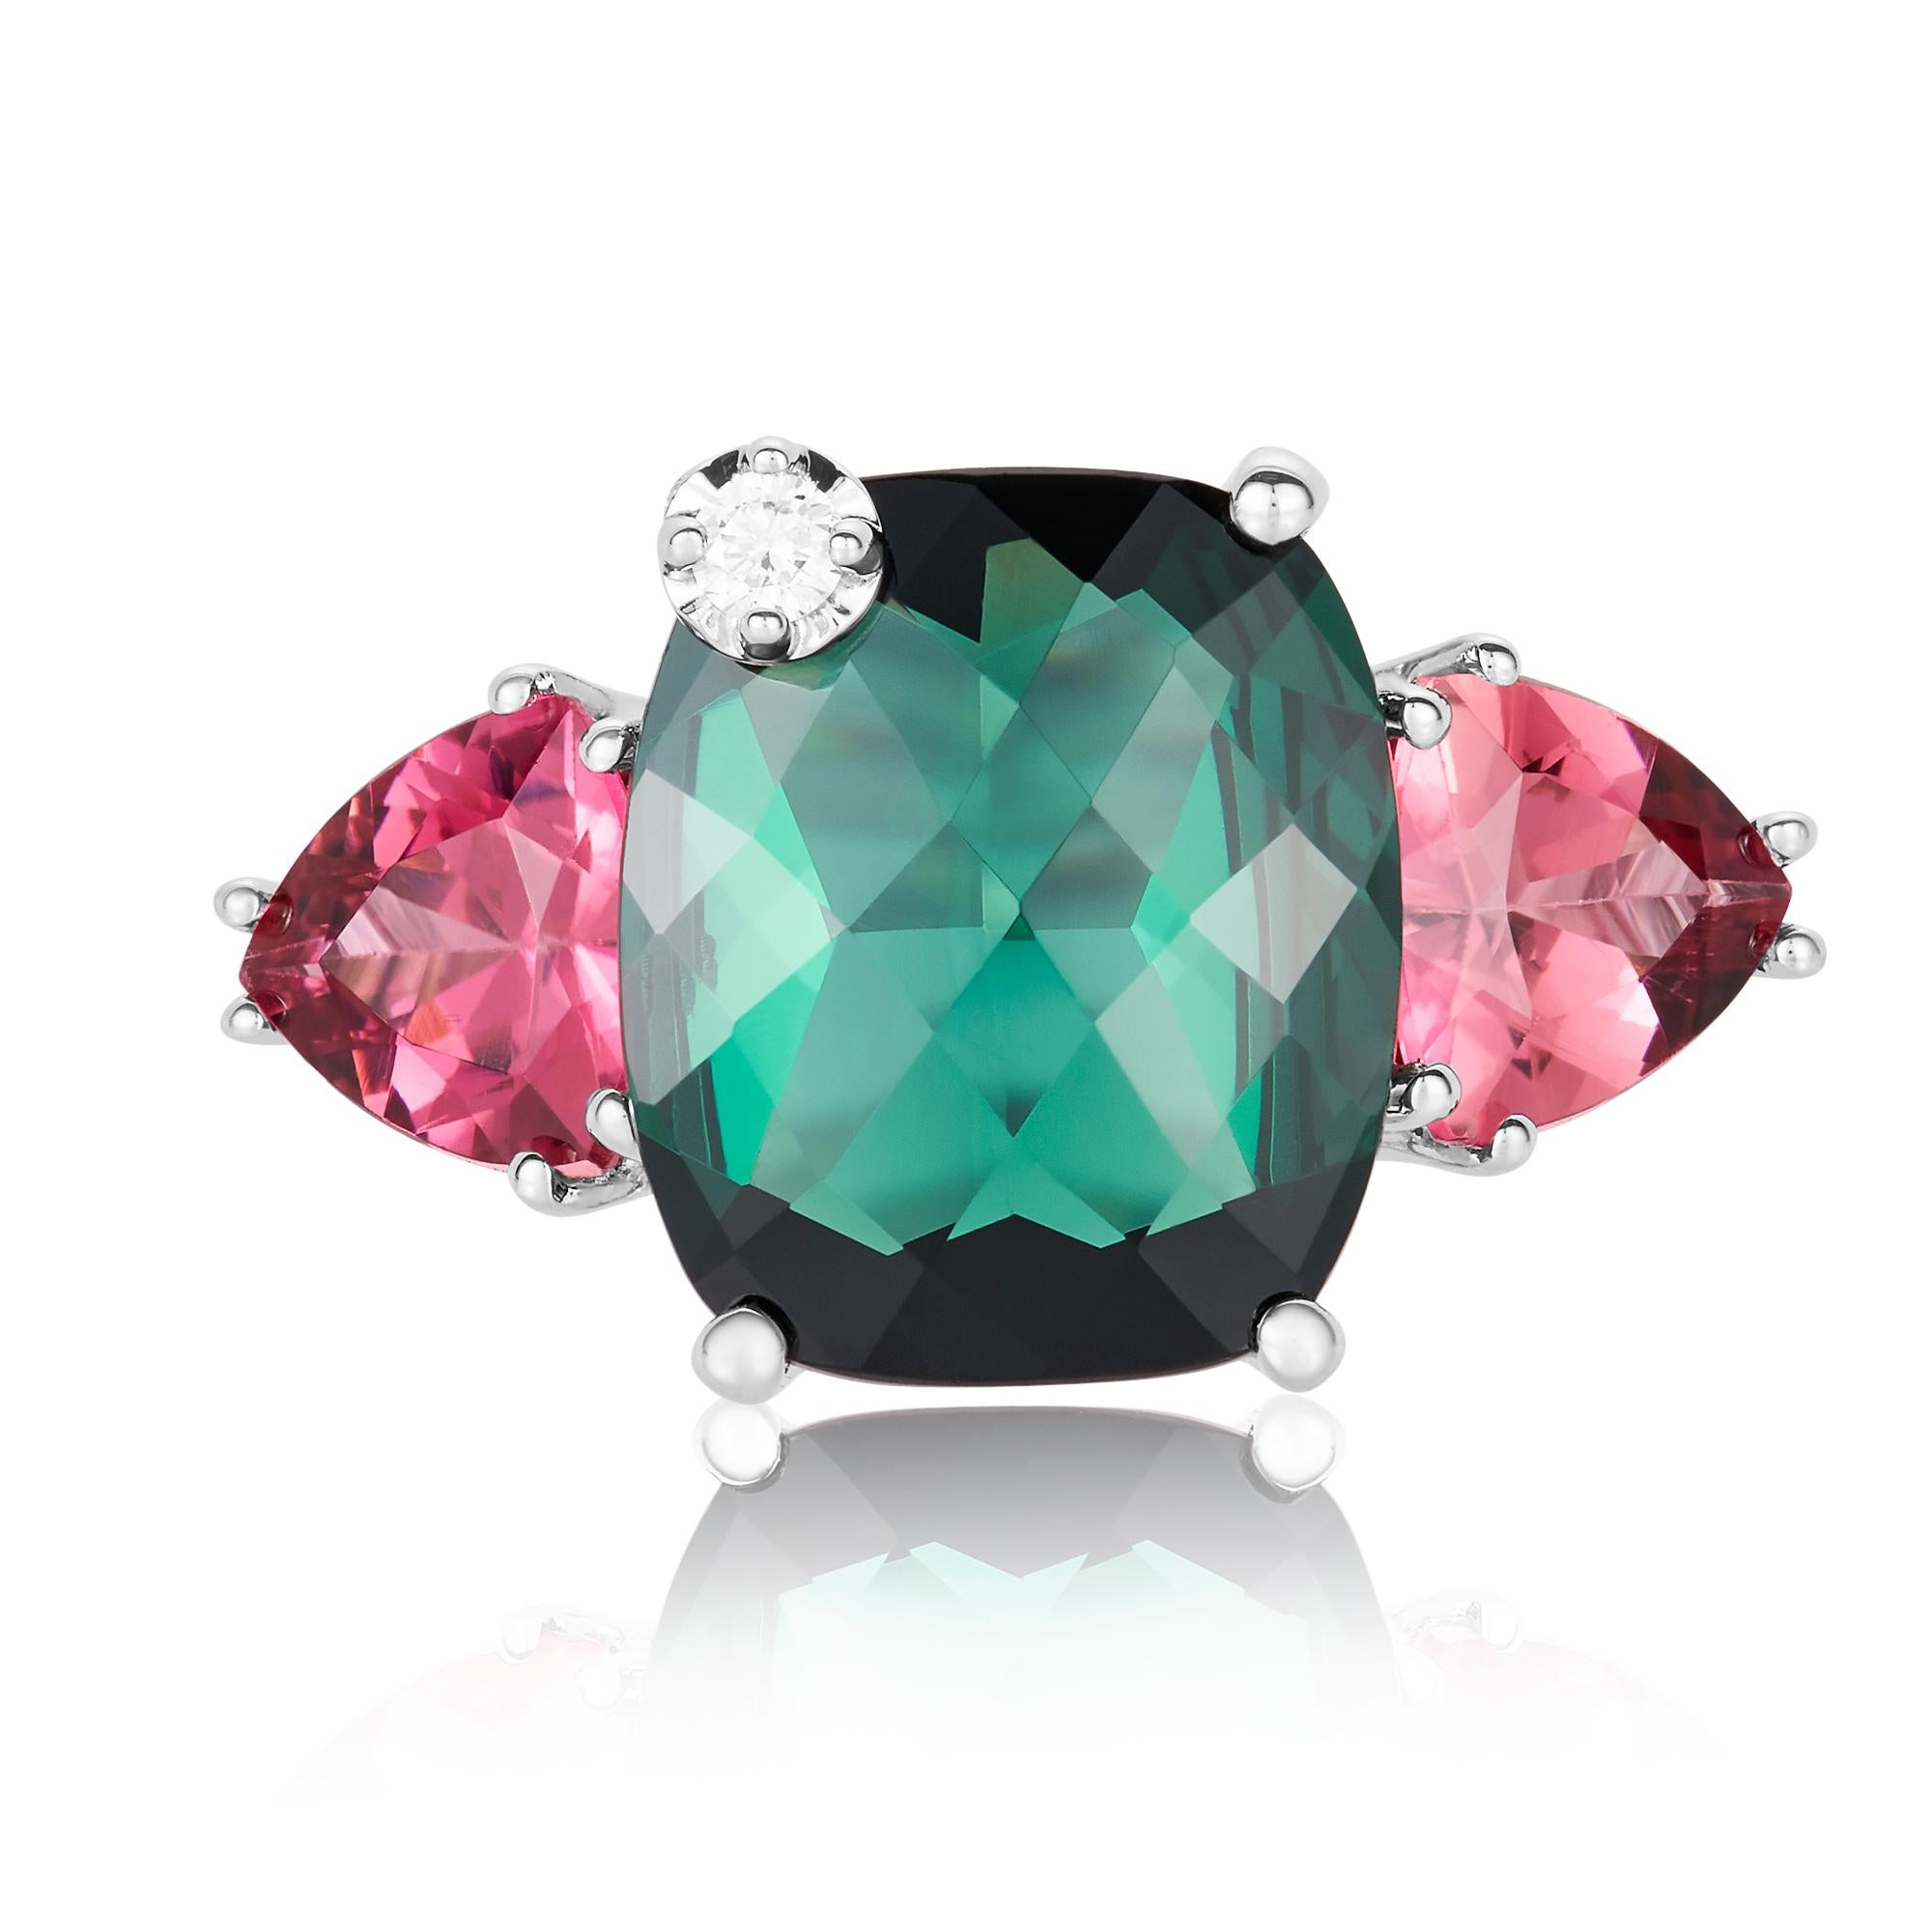 Contemporary 3.78 Carat Cushion Green and Pink Tourmaline, and Diamond Ring 14K White Gold